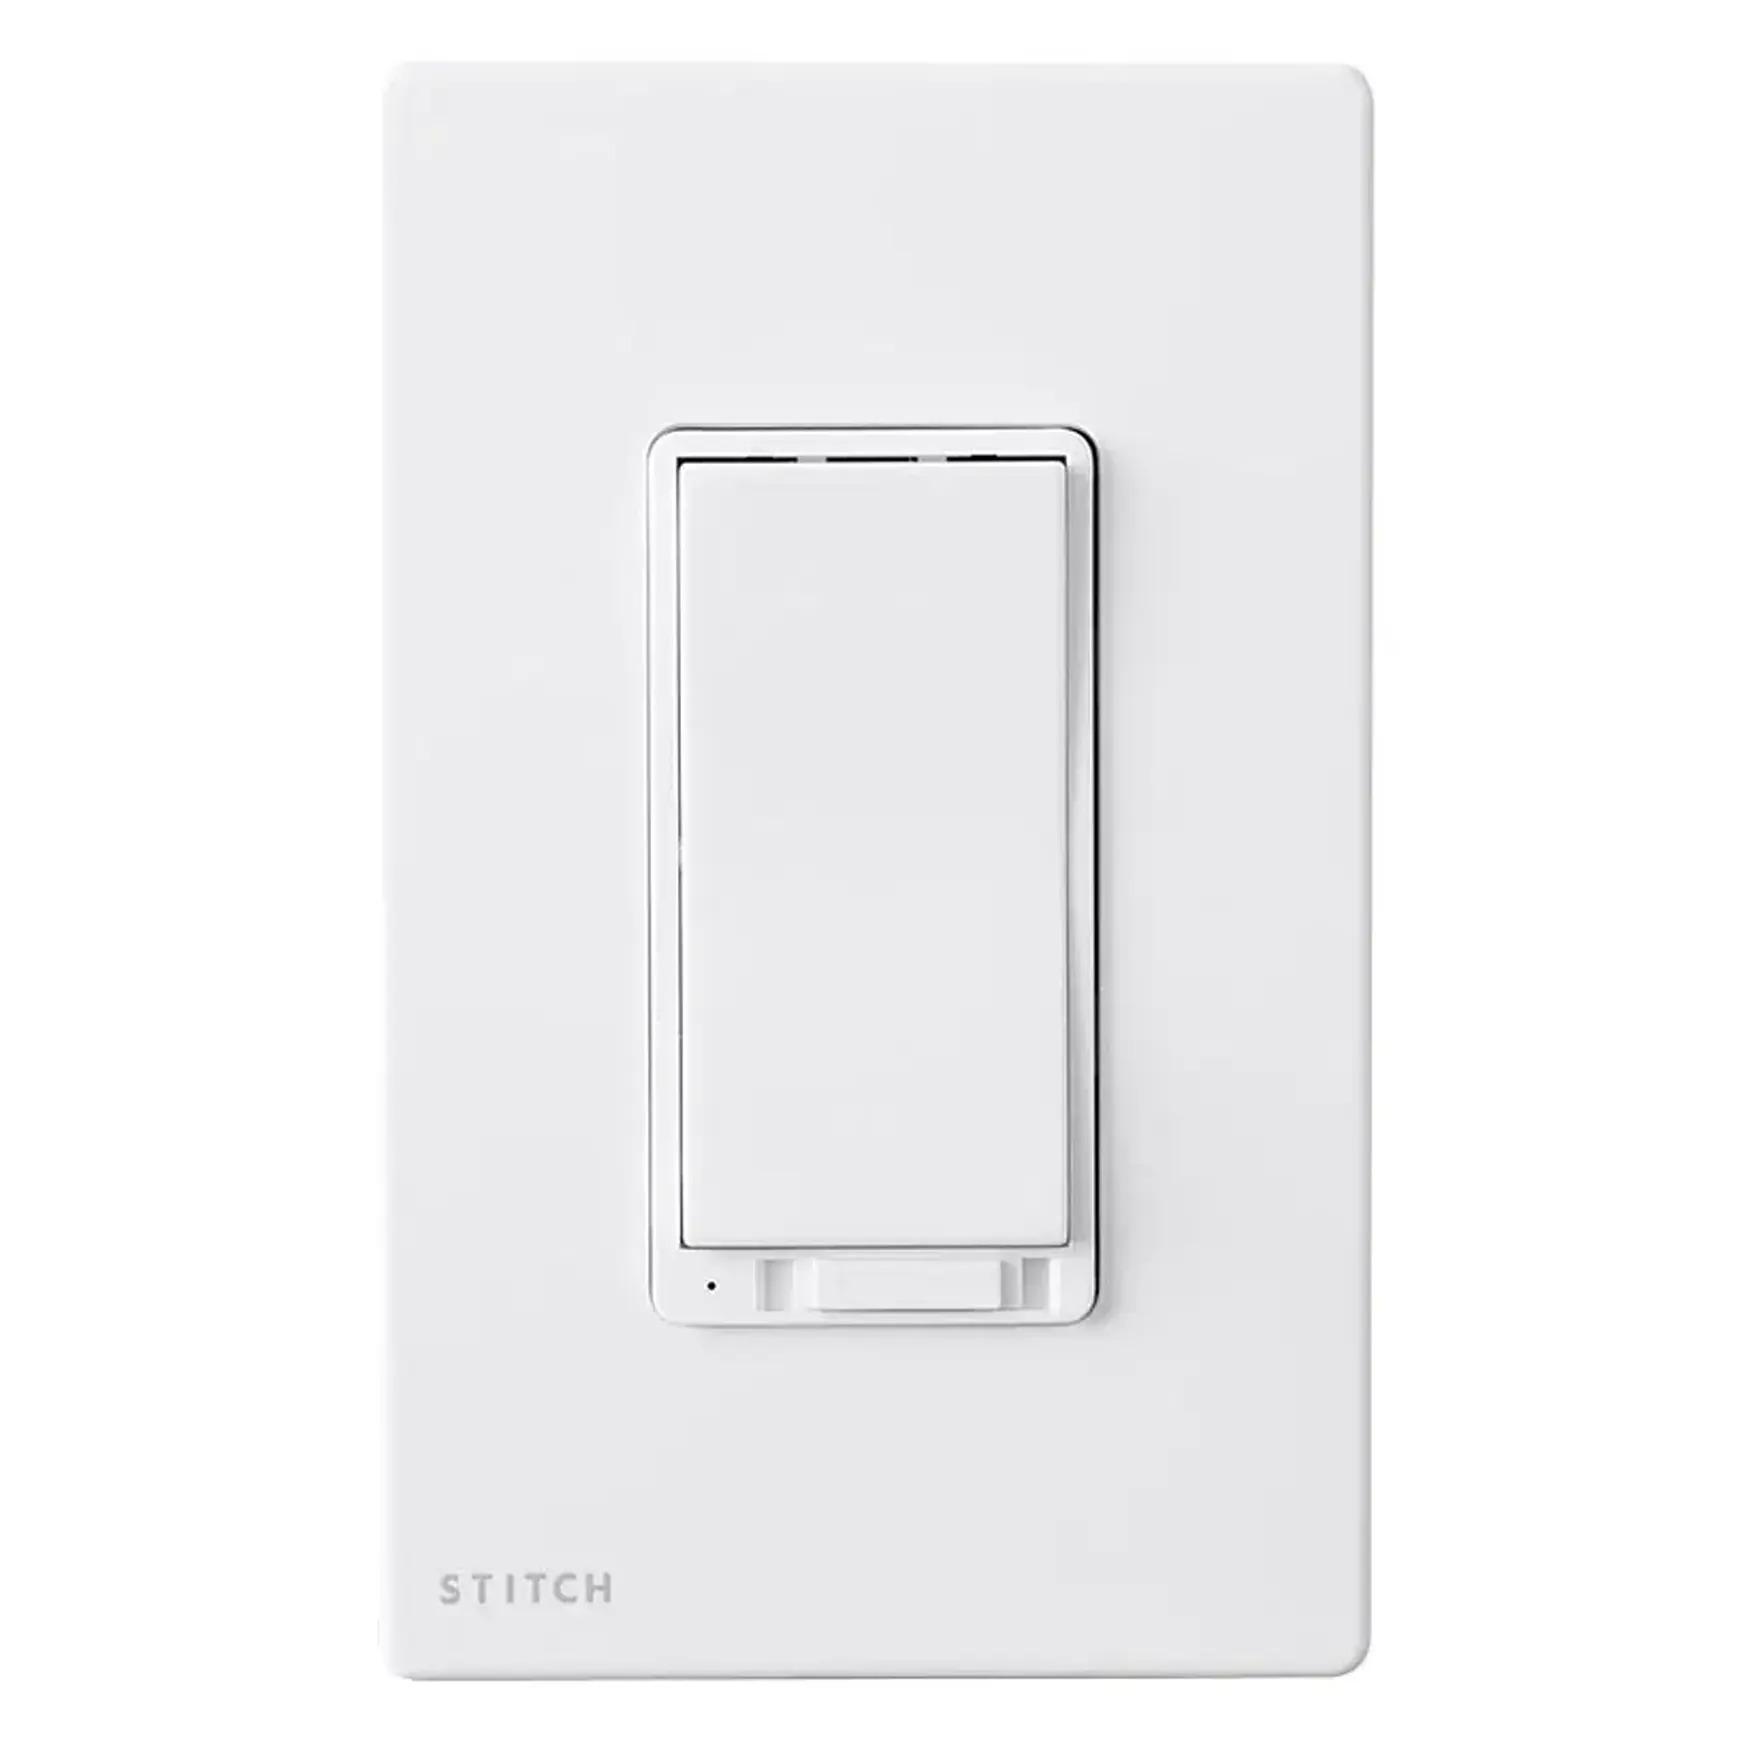 Monoprice Stitch Smart In-Wall Dimmer Switch for $7.99 Shipped